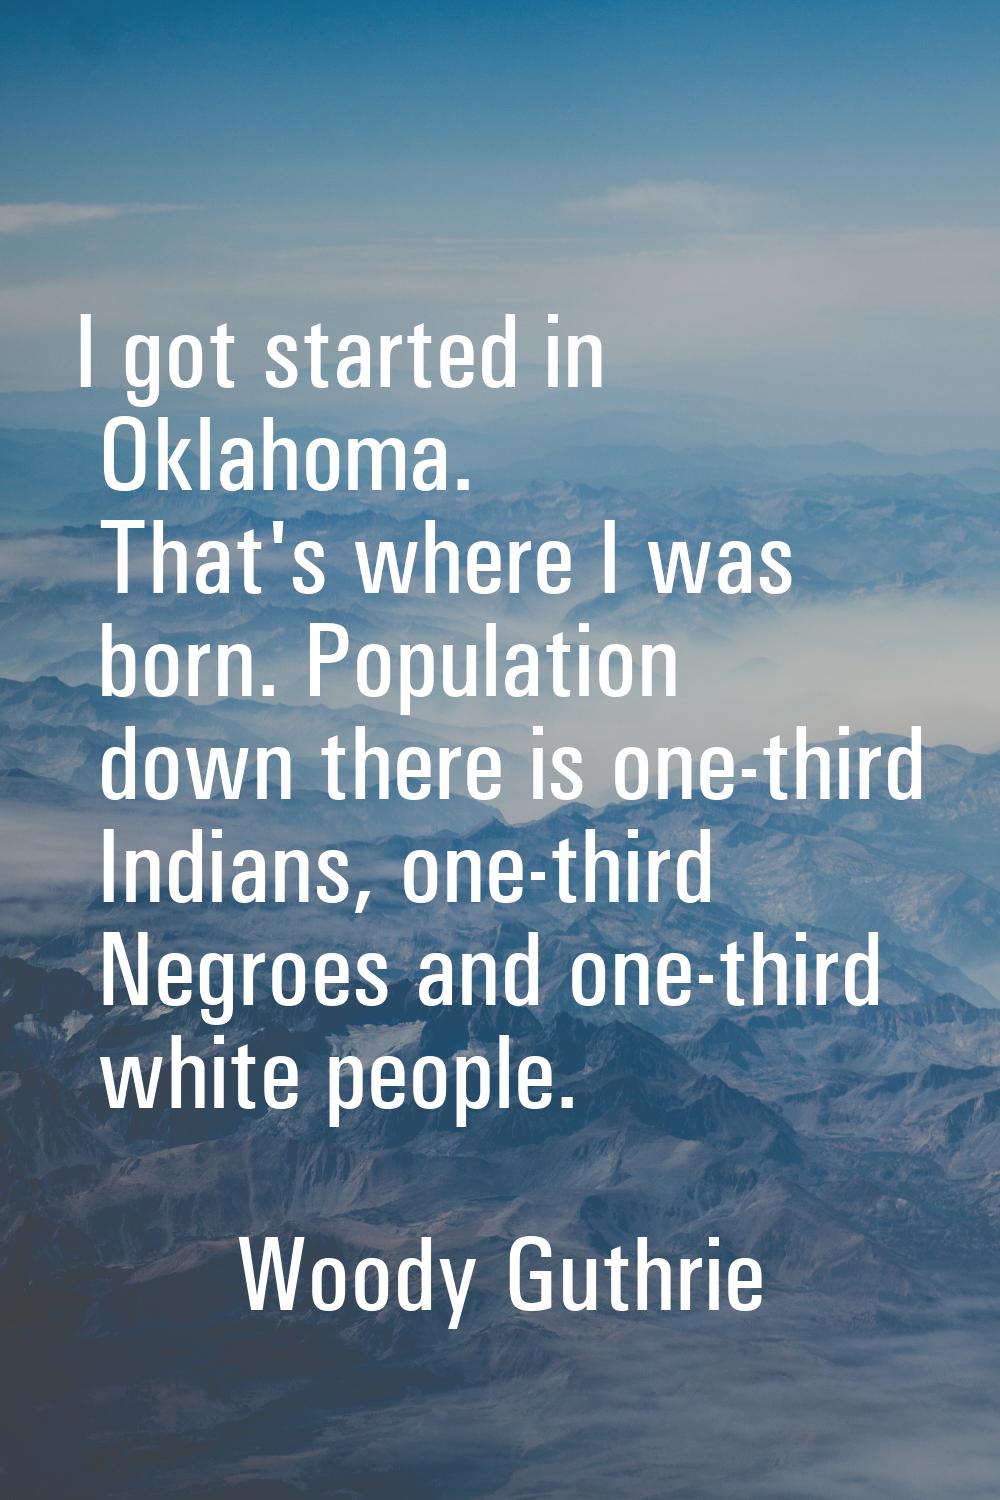 I got started in Oklahoma. That's where I was born. Population down there is one-third Indians, one